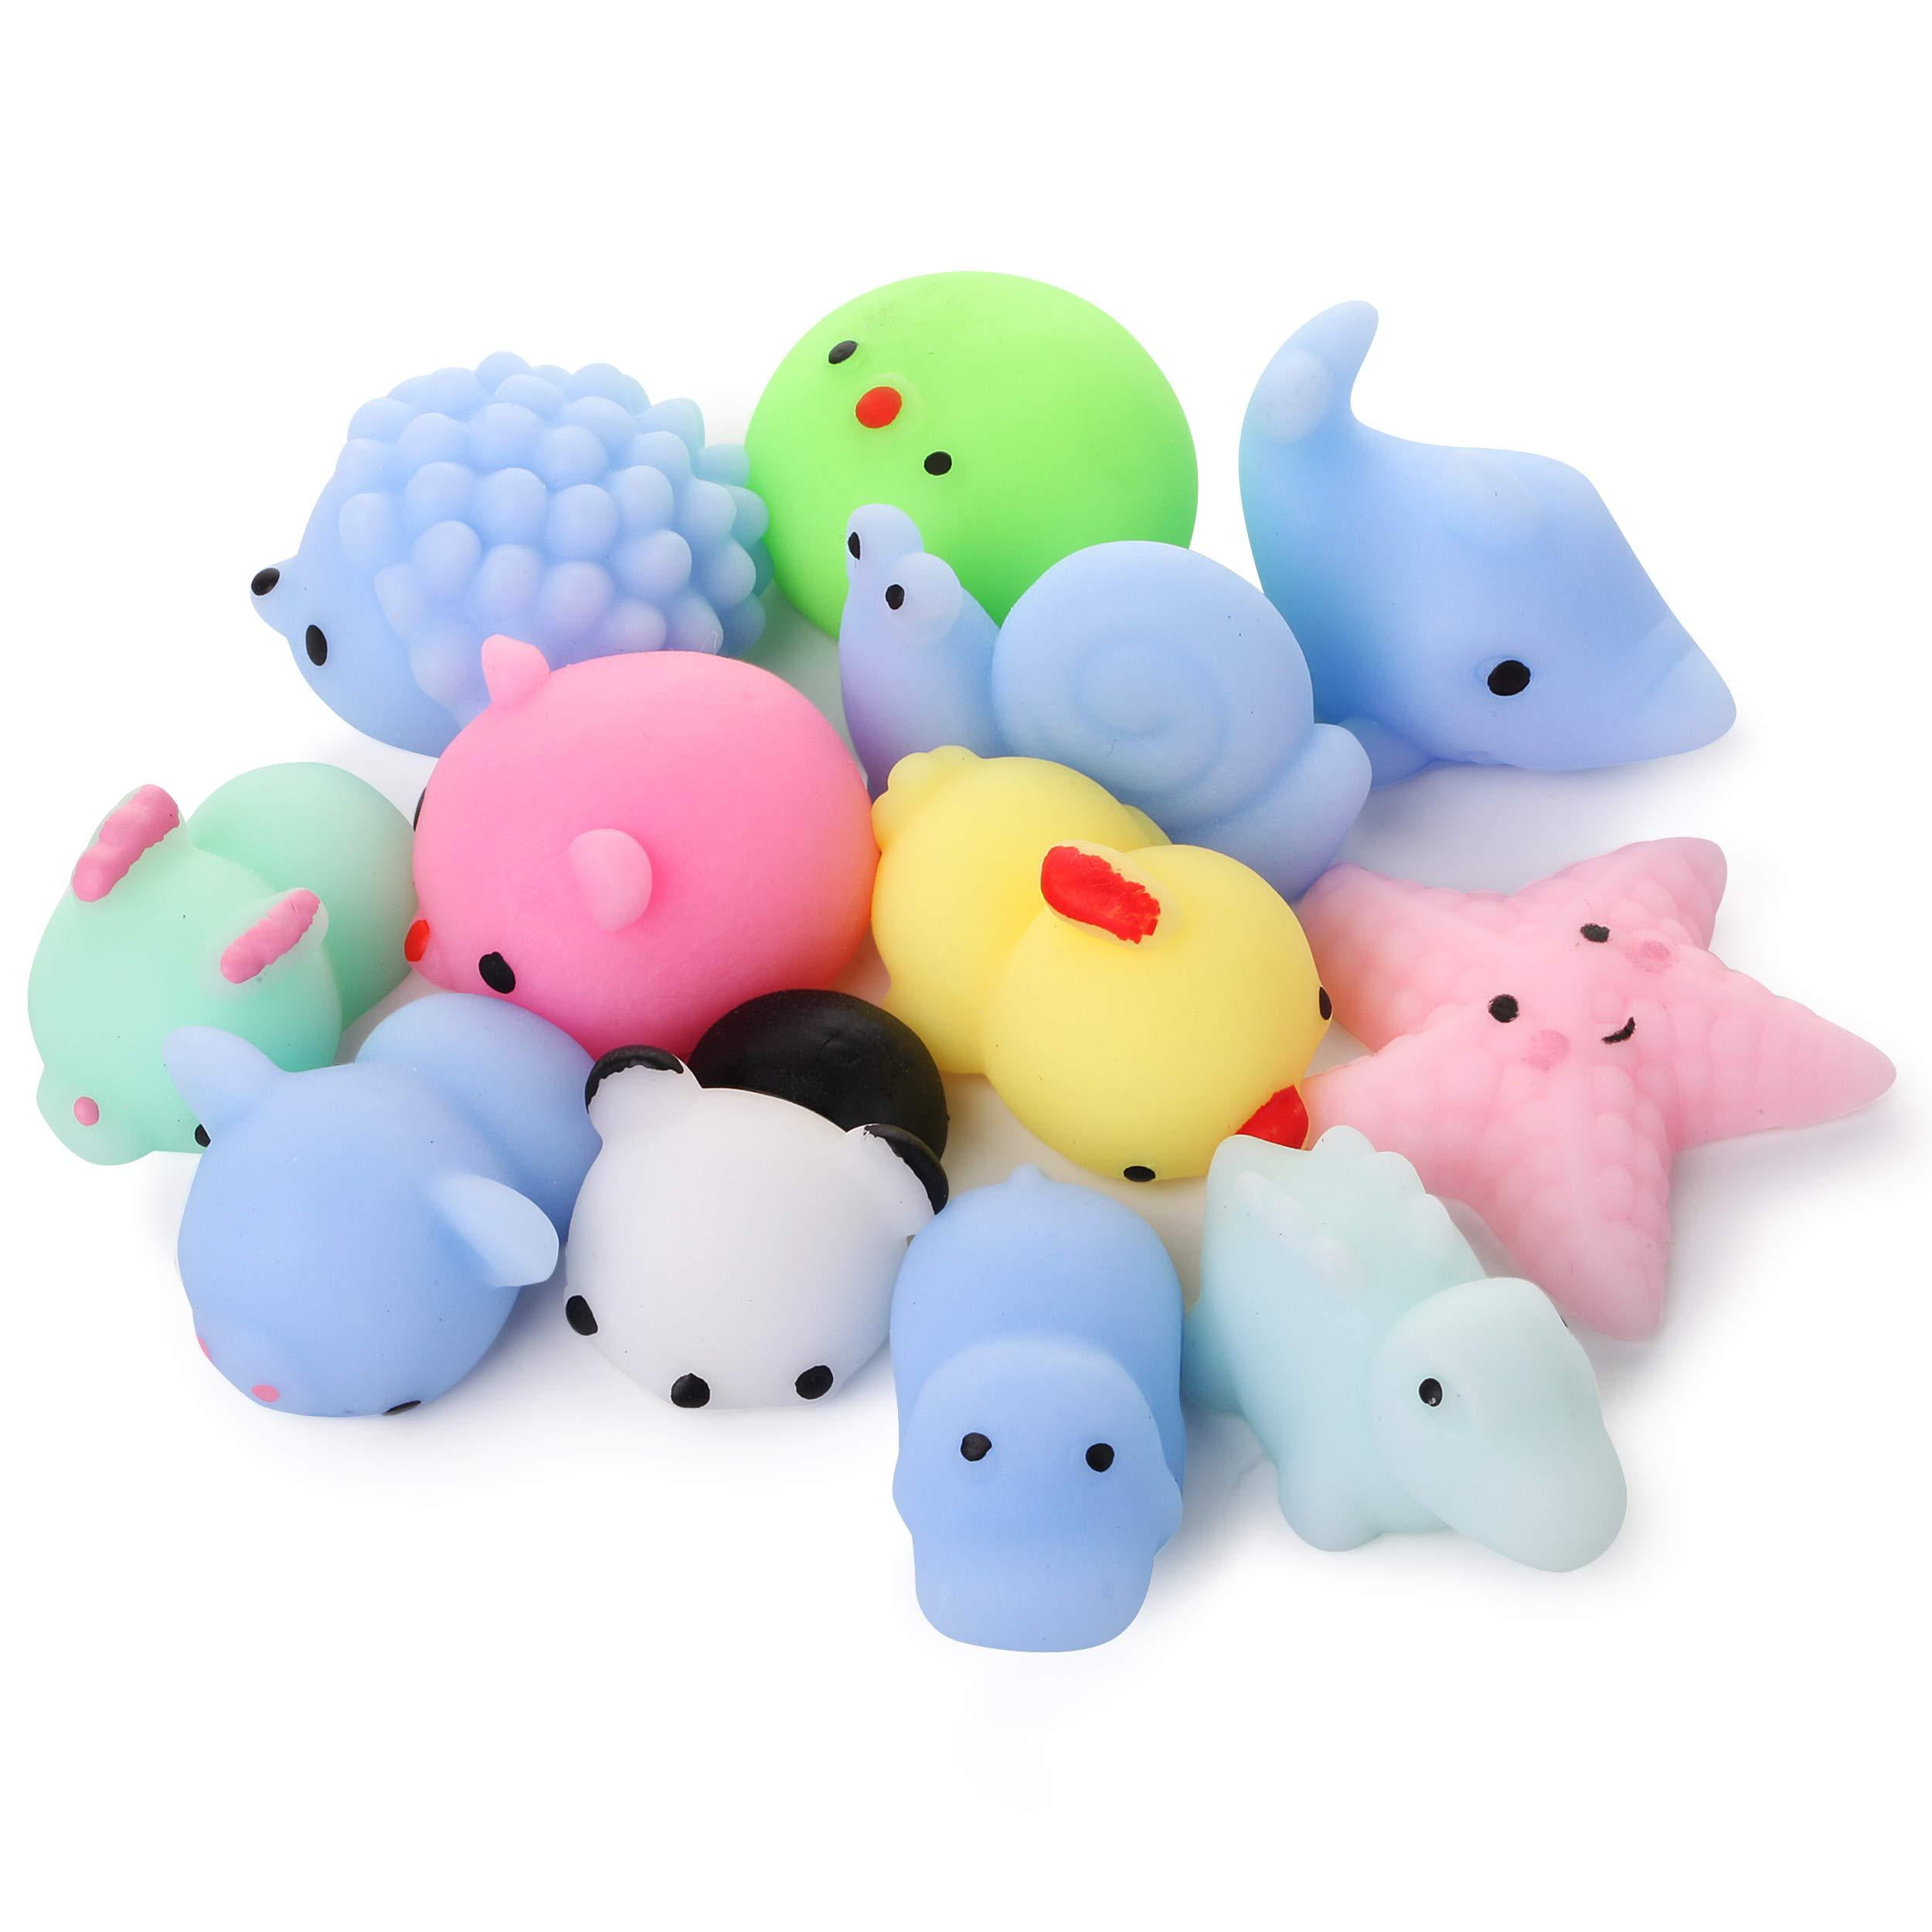 Mr. Pen- Squishy Toys, 12 Pack, Squishy, Squishes for Kids